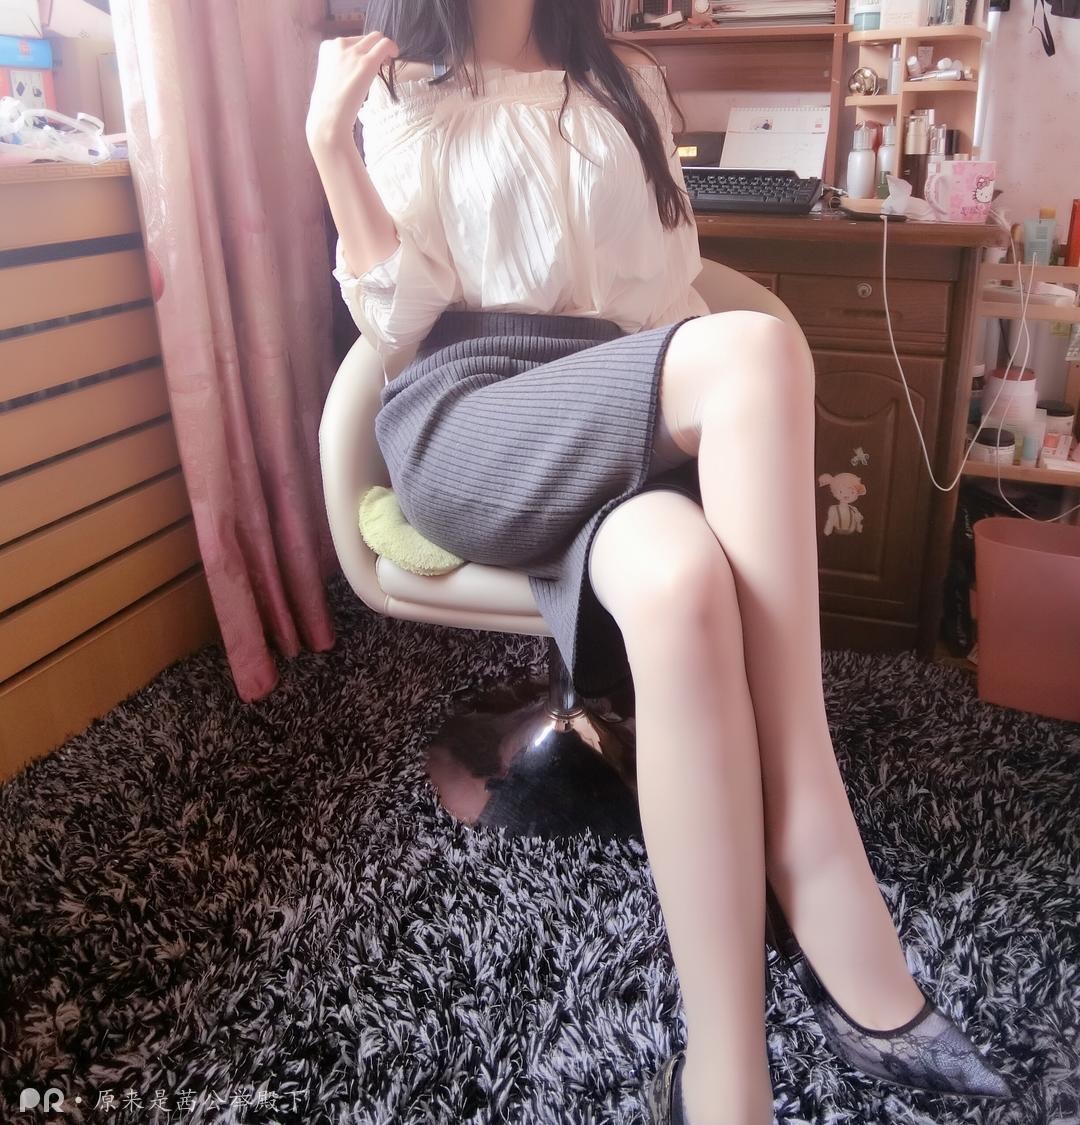 Weibo girl turned out to be her royal highness - pure and sexy stockings